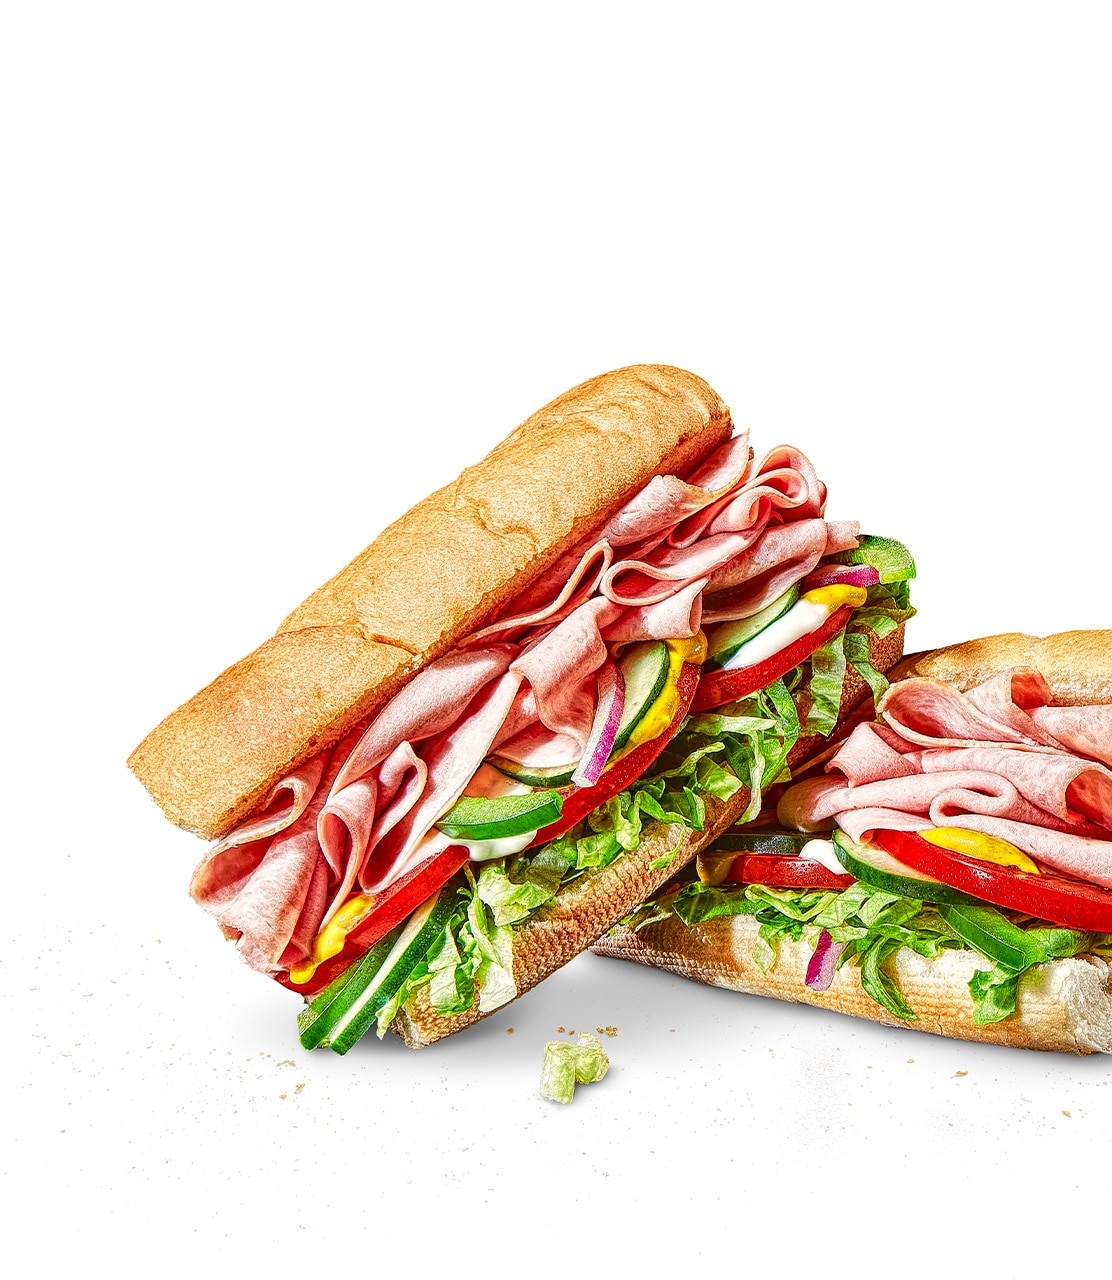 Calories in Subway Cold Cut Combo six inch Sub